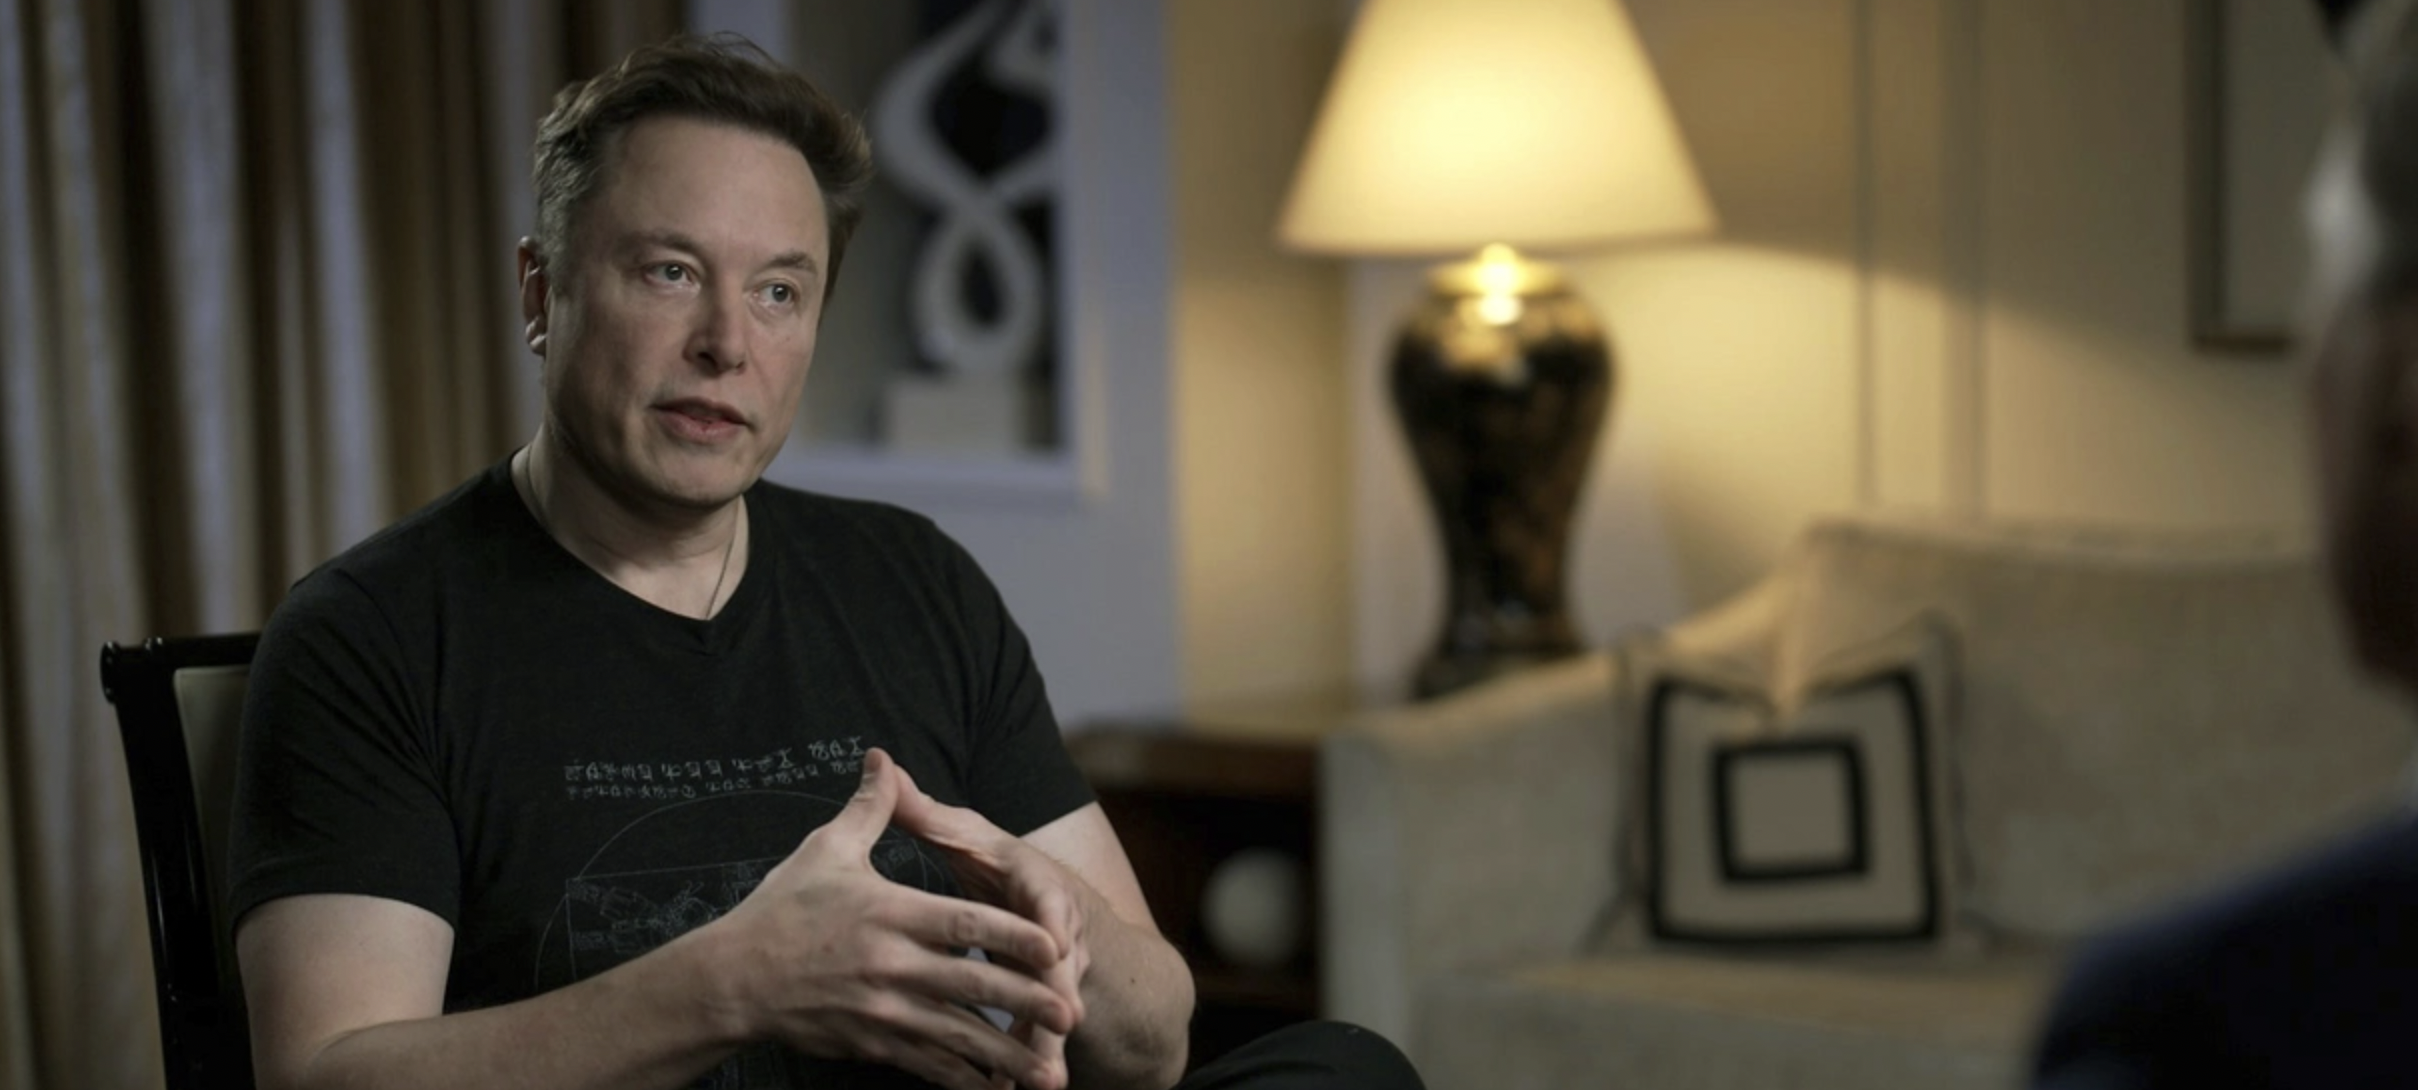 Elon Musk loses world’s richest person title after 3 years